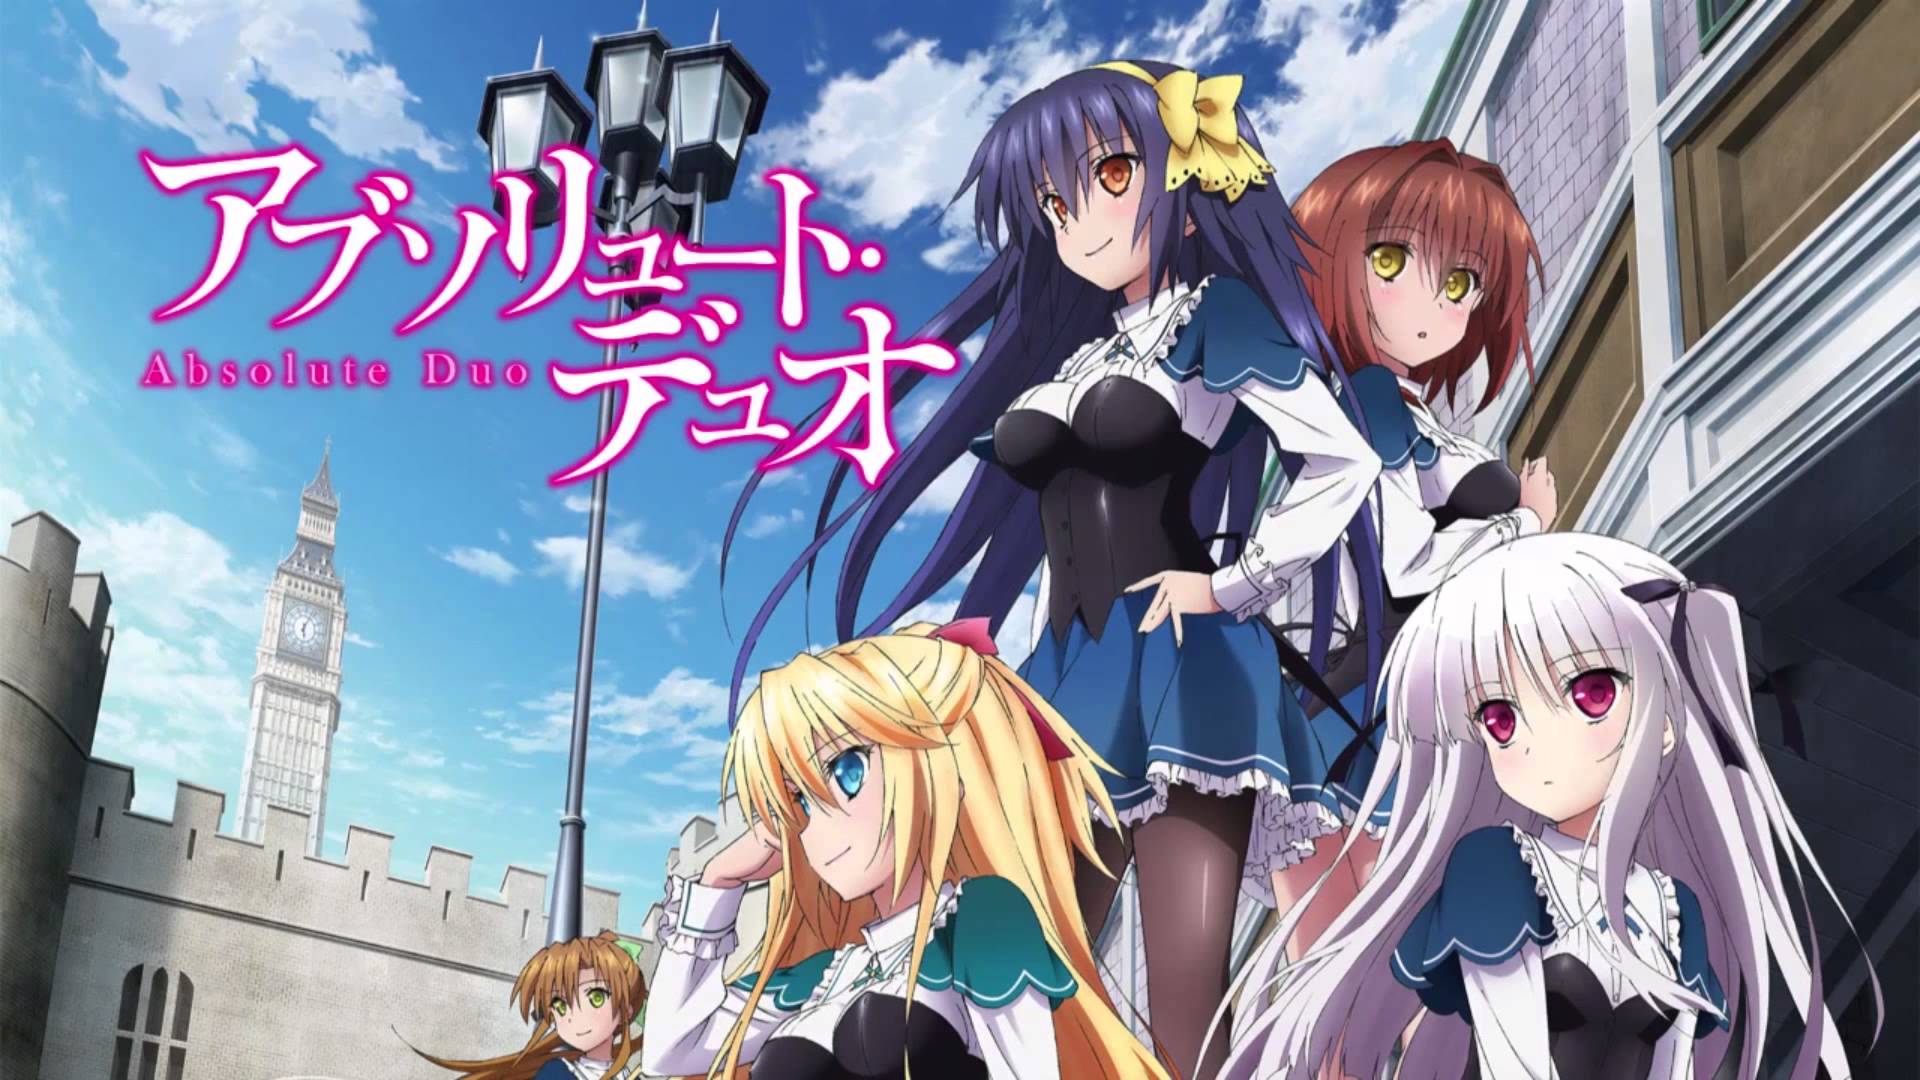 Absolute Duo Backgrounds, Compatible - PC, Mobile, Gadgets| 1920x1080 px